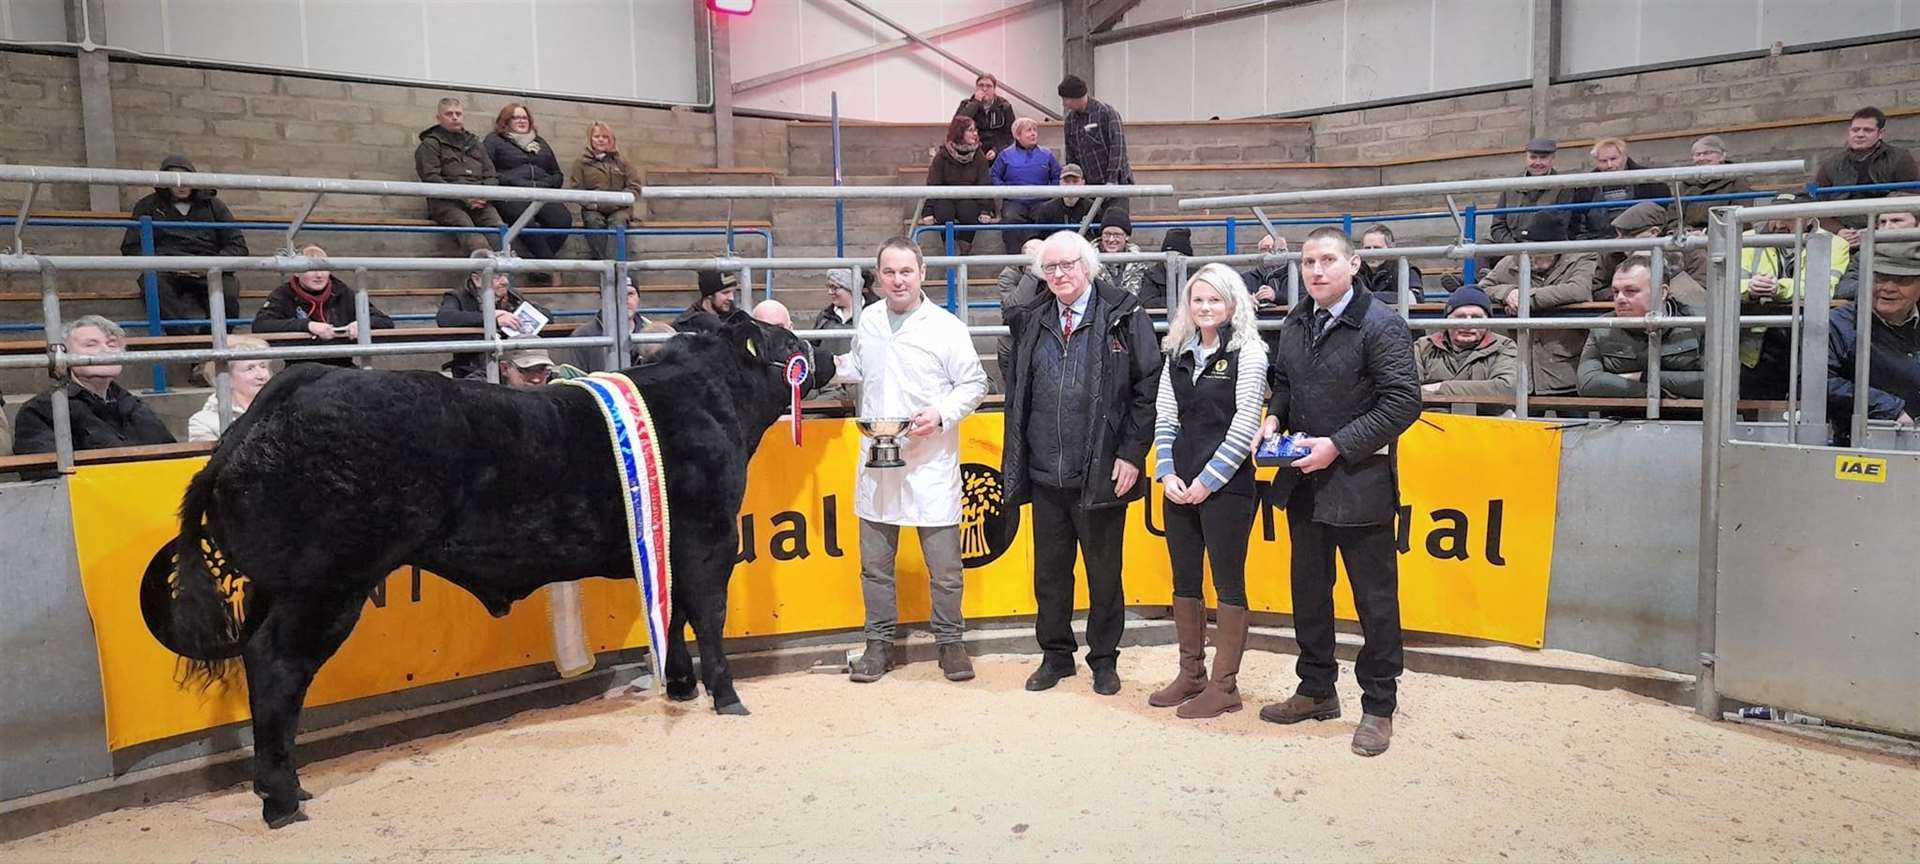 Gordie Begg with his open champion, a Limousin cross bullock, at Quoybrae mart's Christmas show and sale, along with buyer Murray Lamont of Mackays Hotel, Lynn Sinclair from NFU Mutual, sponsor of the class, and judge Gary Raeburn.